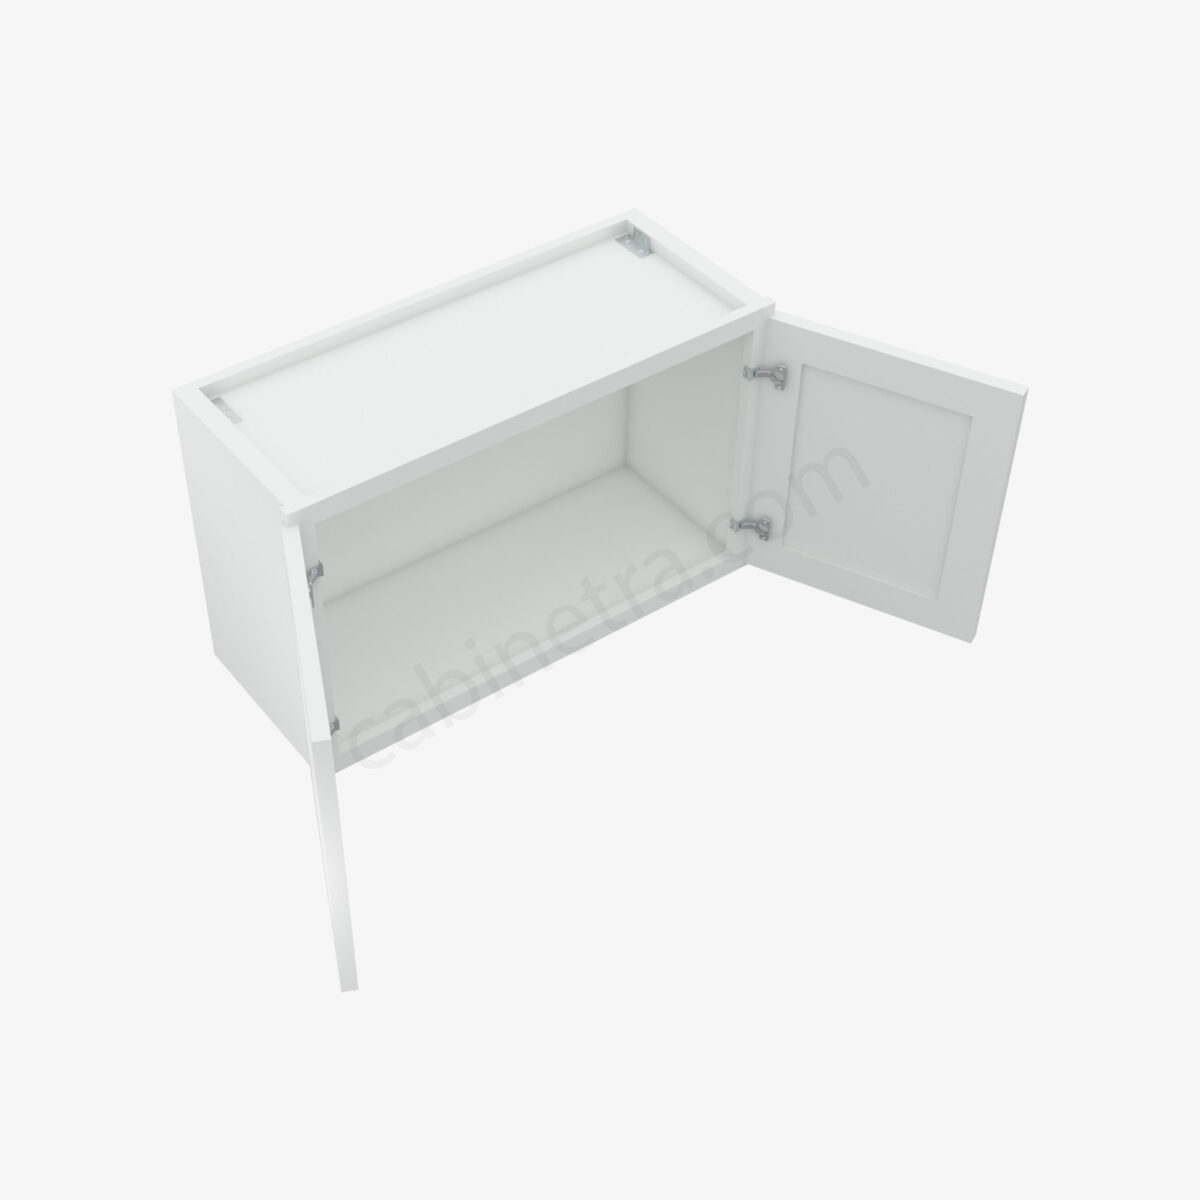 TW W3018B 2 Forevermark Uptown White Cabinetra scaled